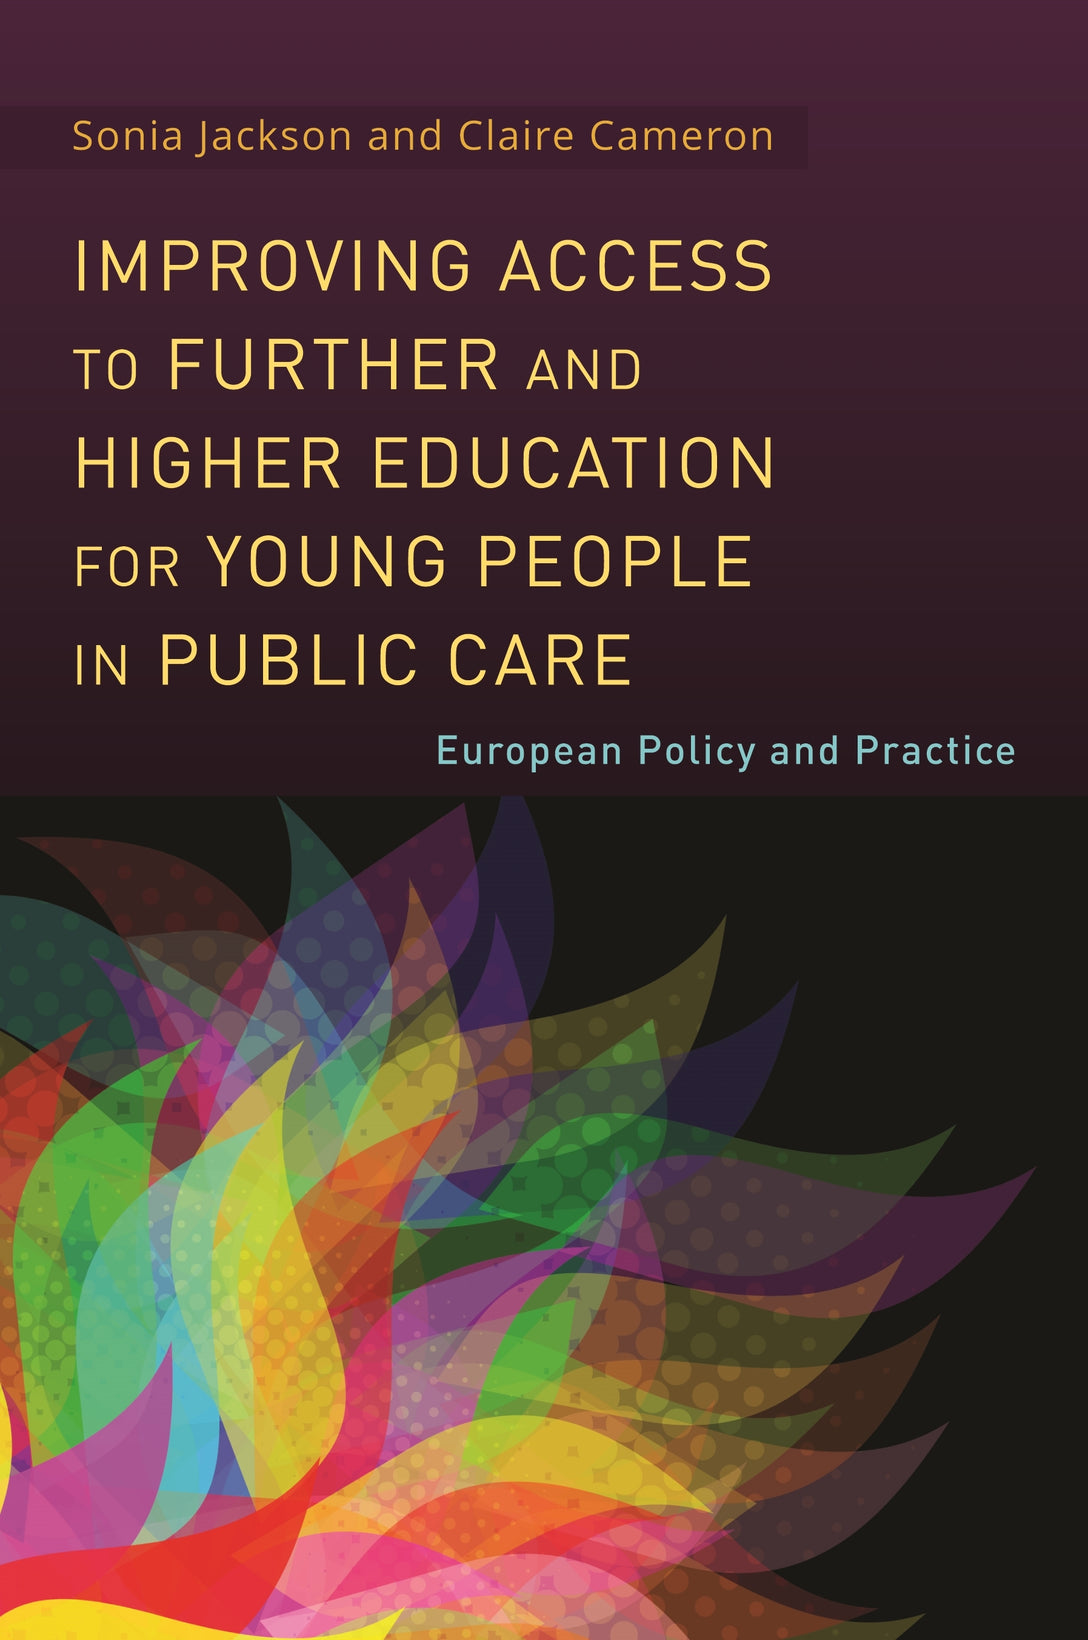 Improving Access to Further and Higher Education for Young People in Public Care by Claire Cameron, Sonia Jackson